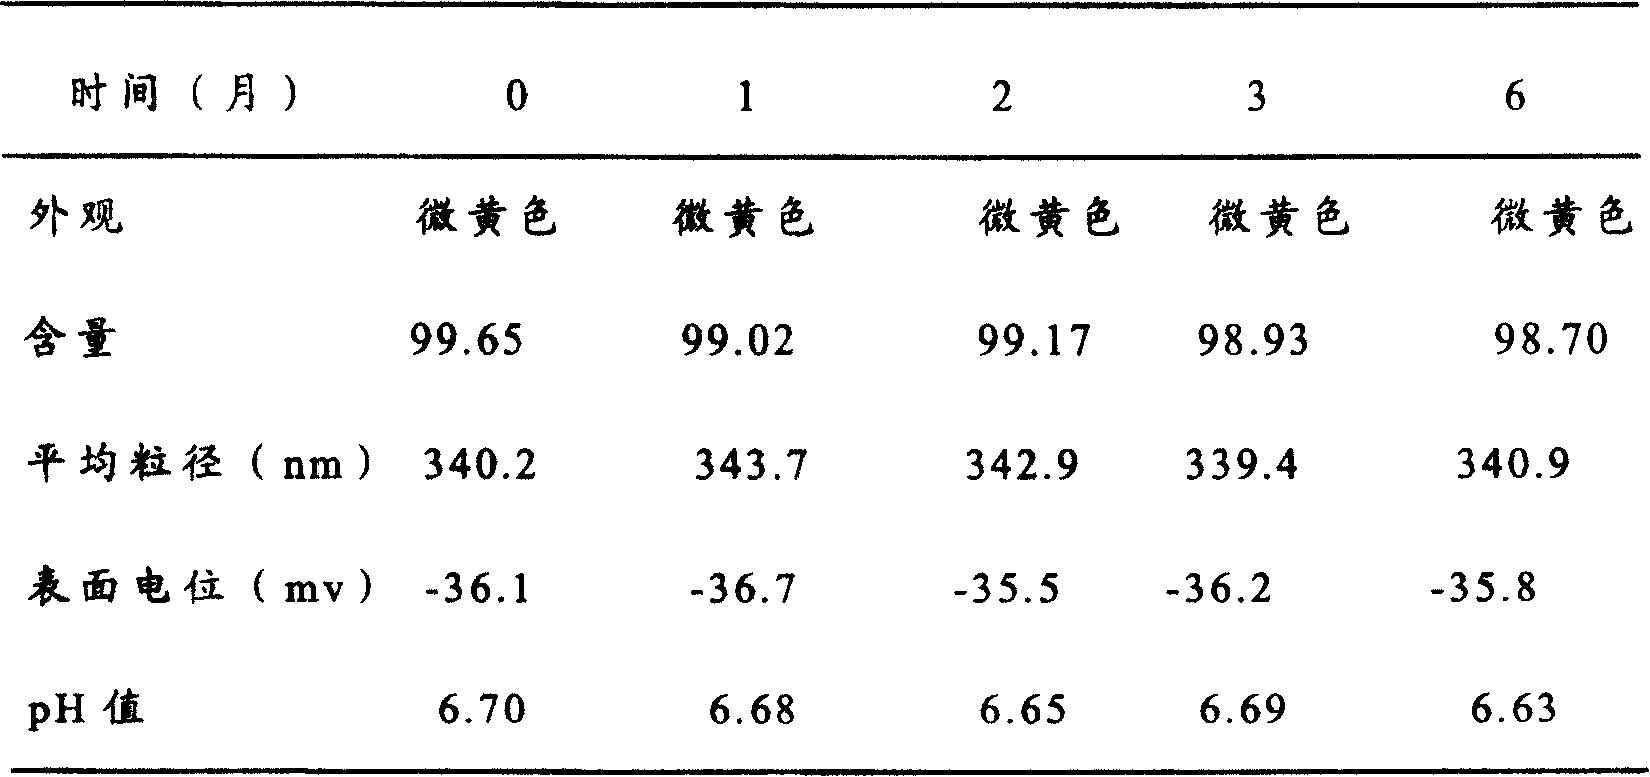 Oryzanol composition and its preparation method